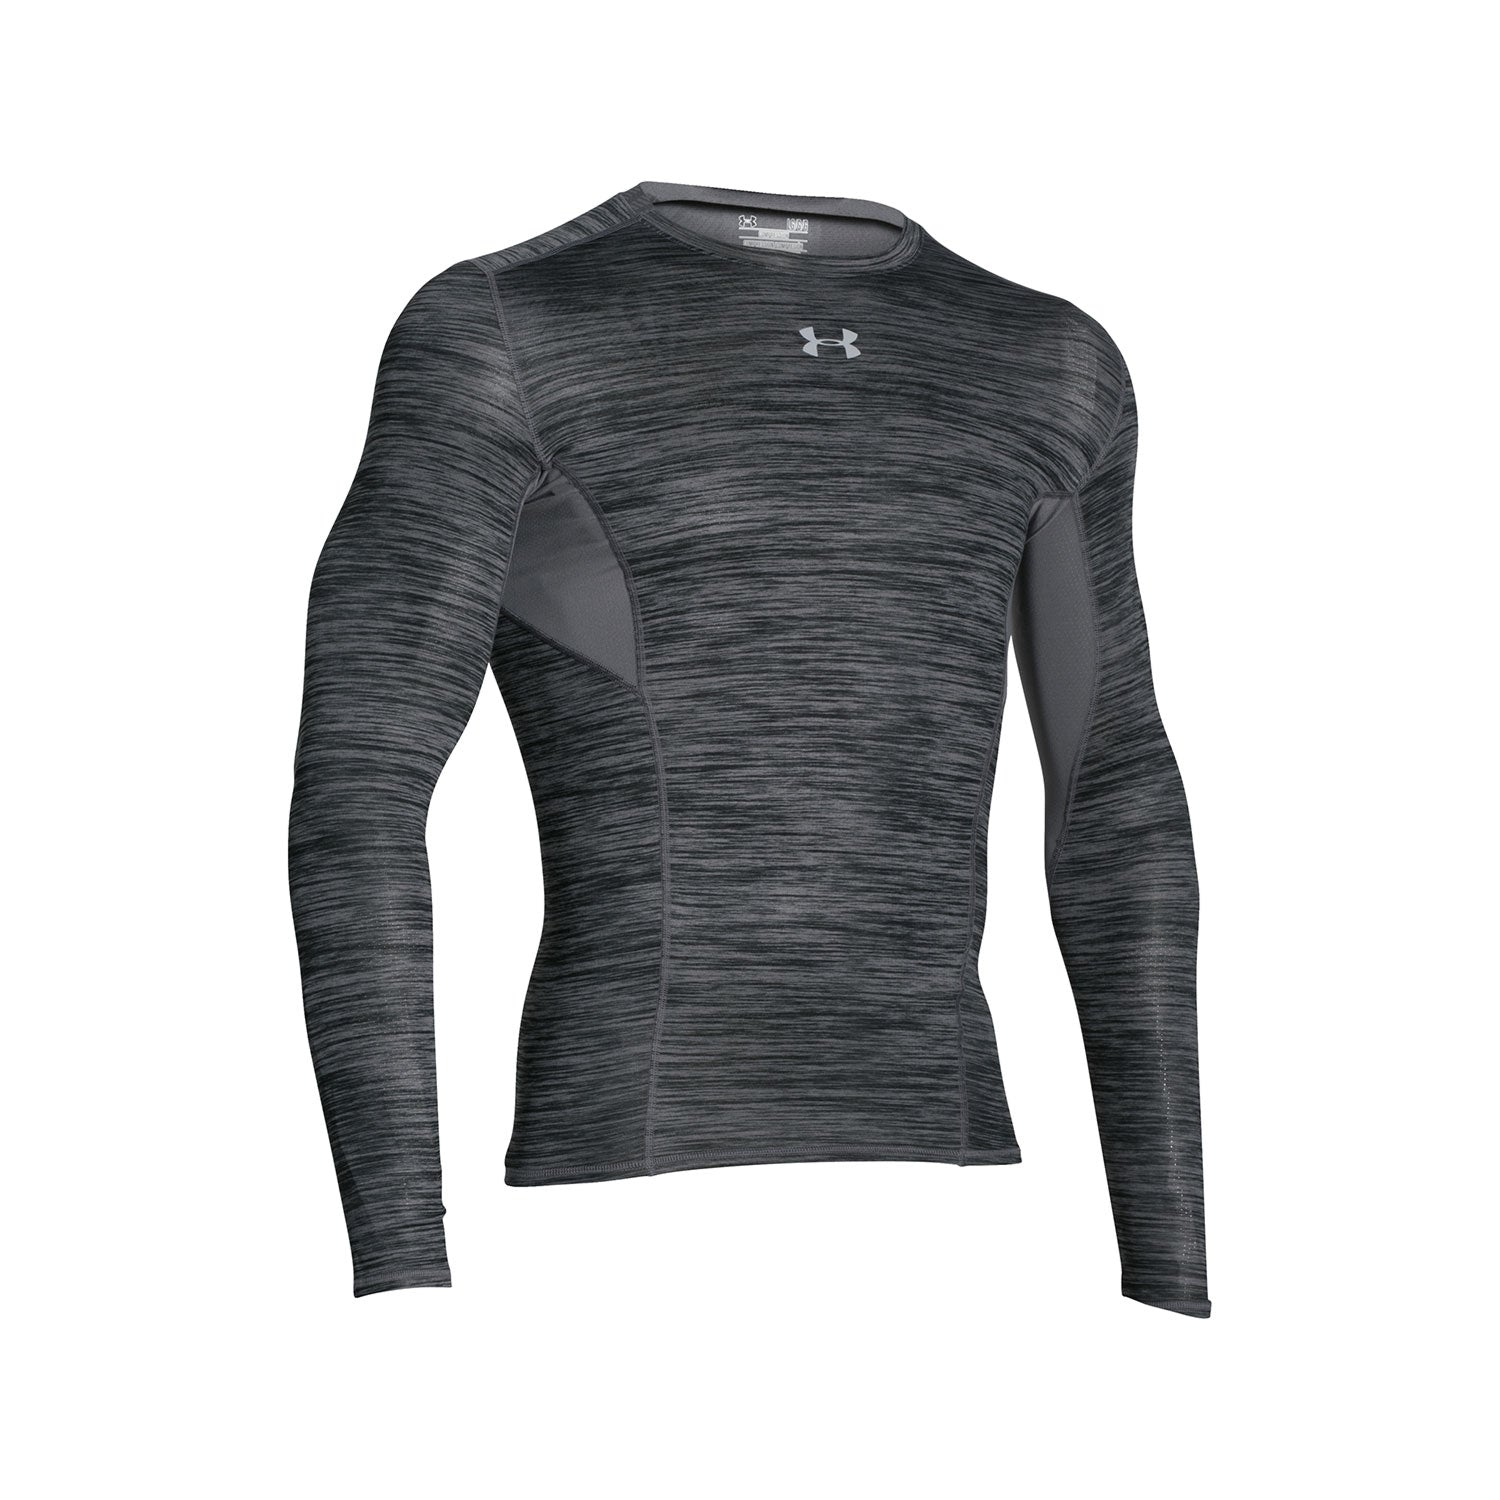 Under Armour Men's UA CoolSwitch Compression Long Sleeve